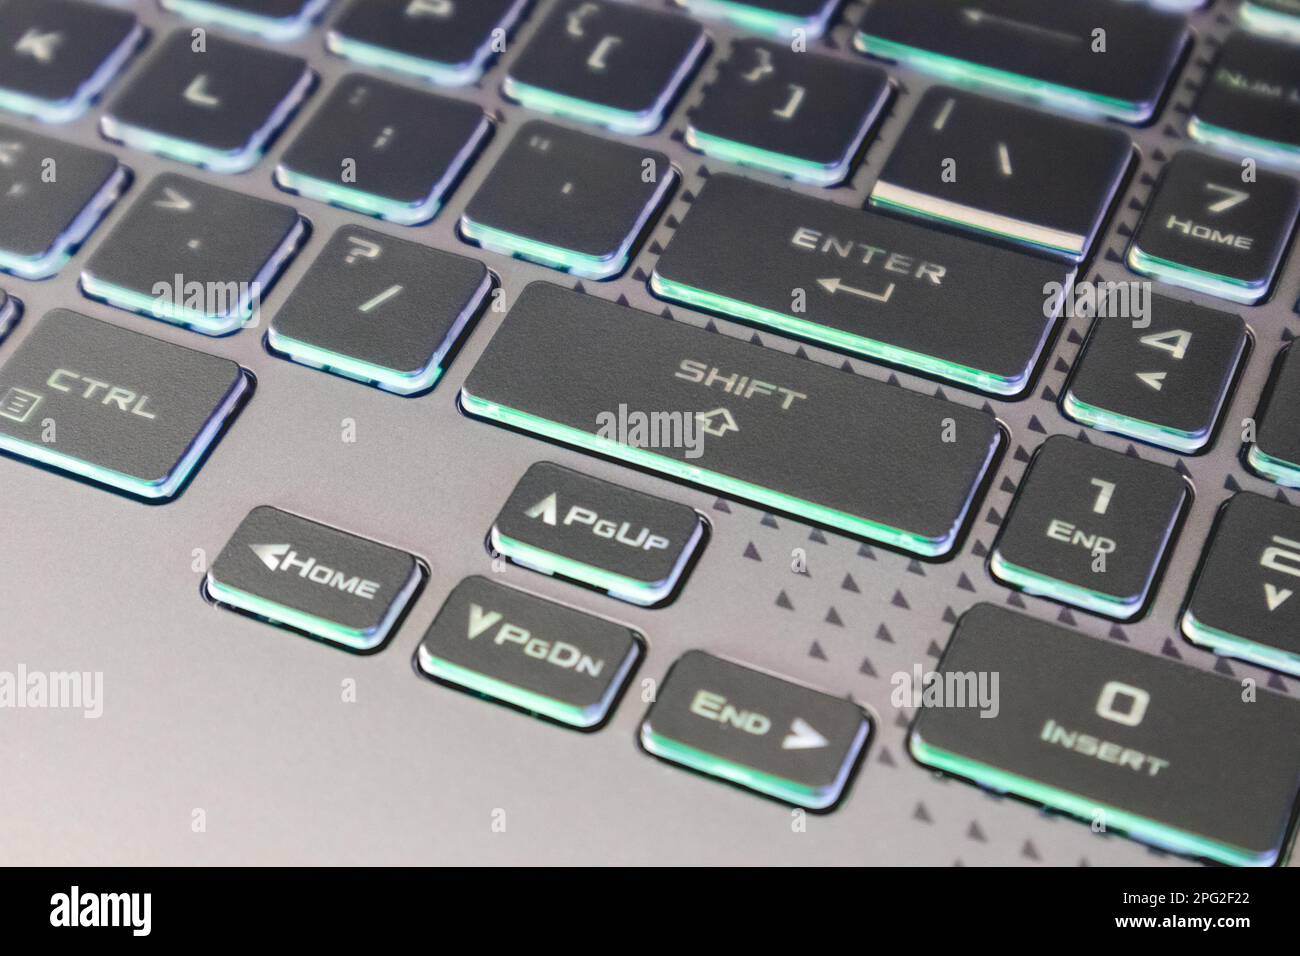 Arrow keys with illumination and selective focus. Gaming powerful grey notebook keyboard close-up. Tech, IT, electronics, computer science background Stock Photo